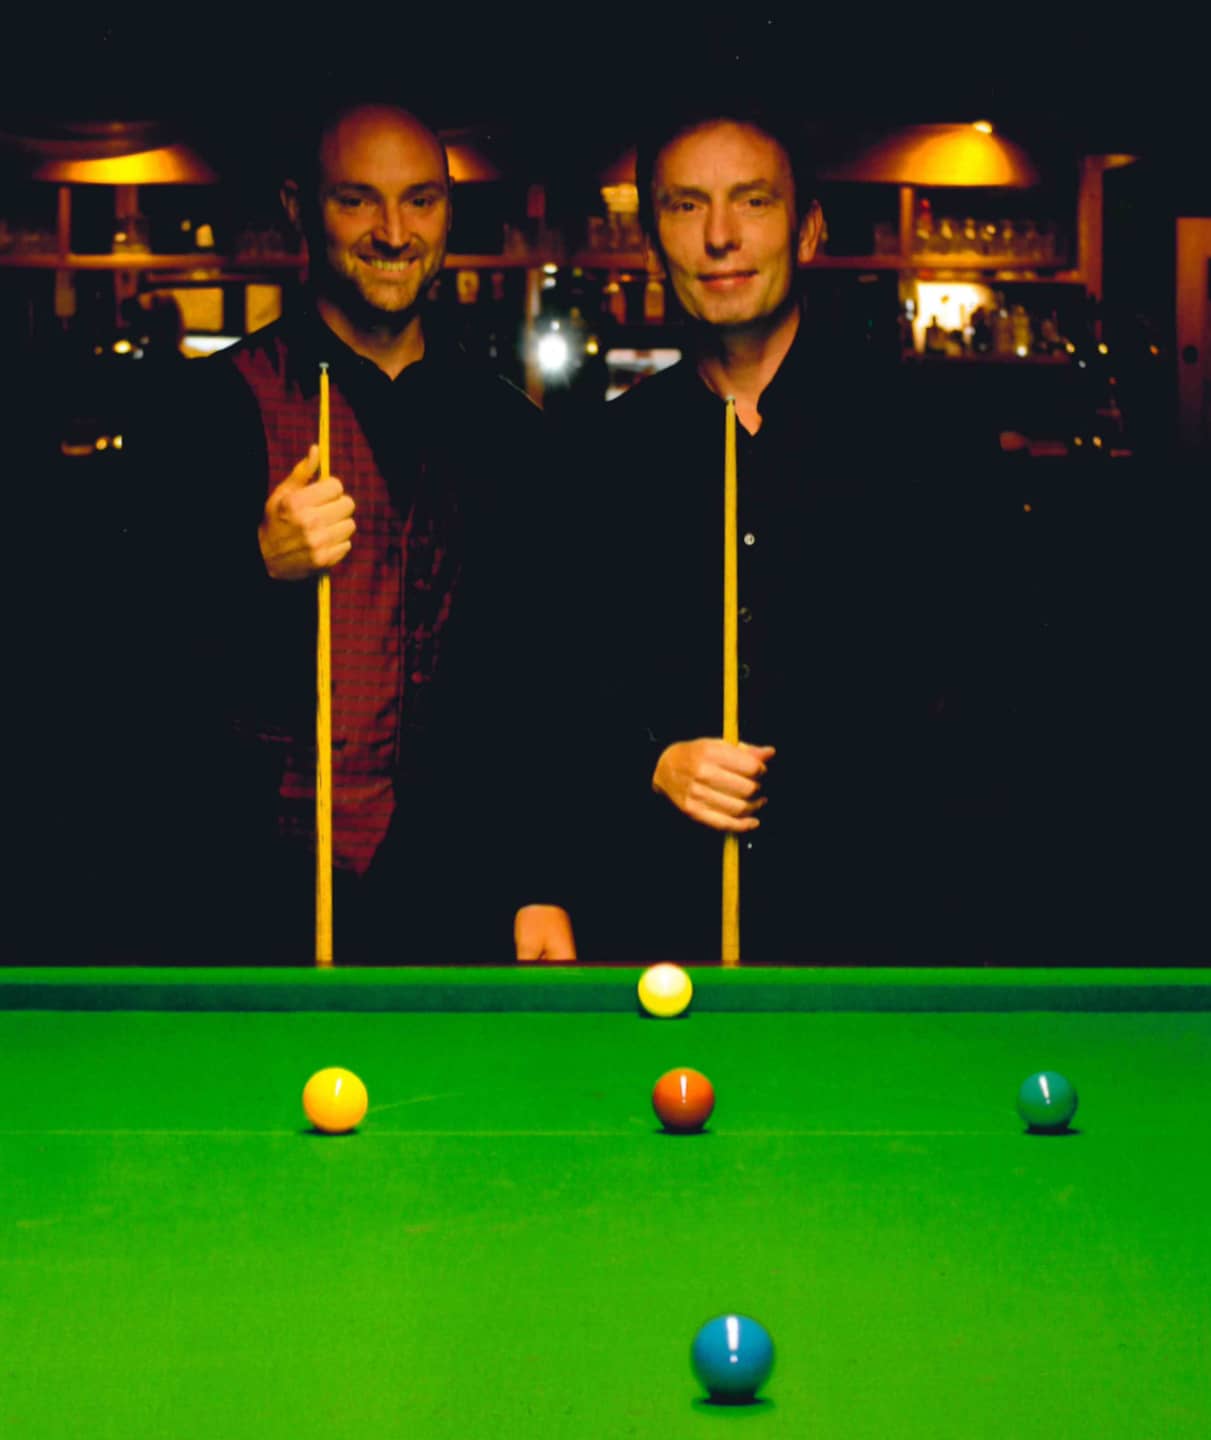 Isle of Wight man plays snooker champion in match of his life